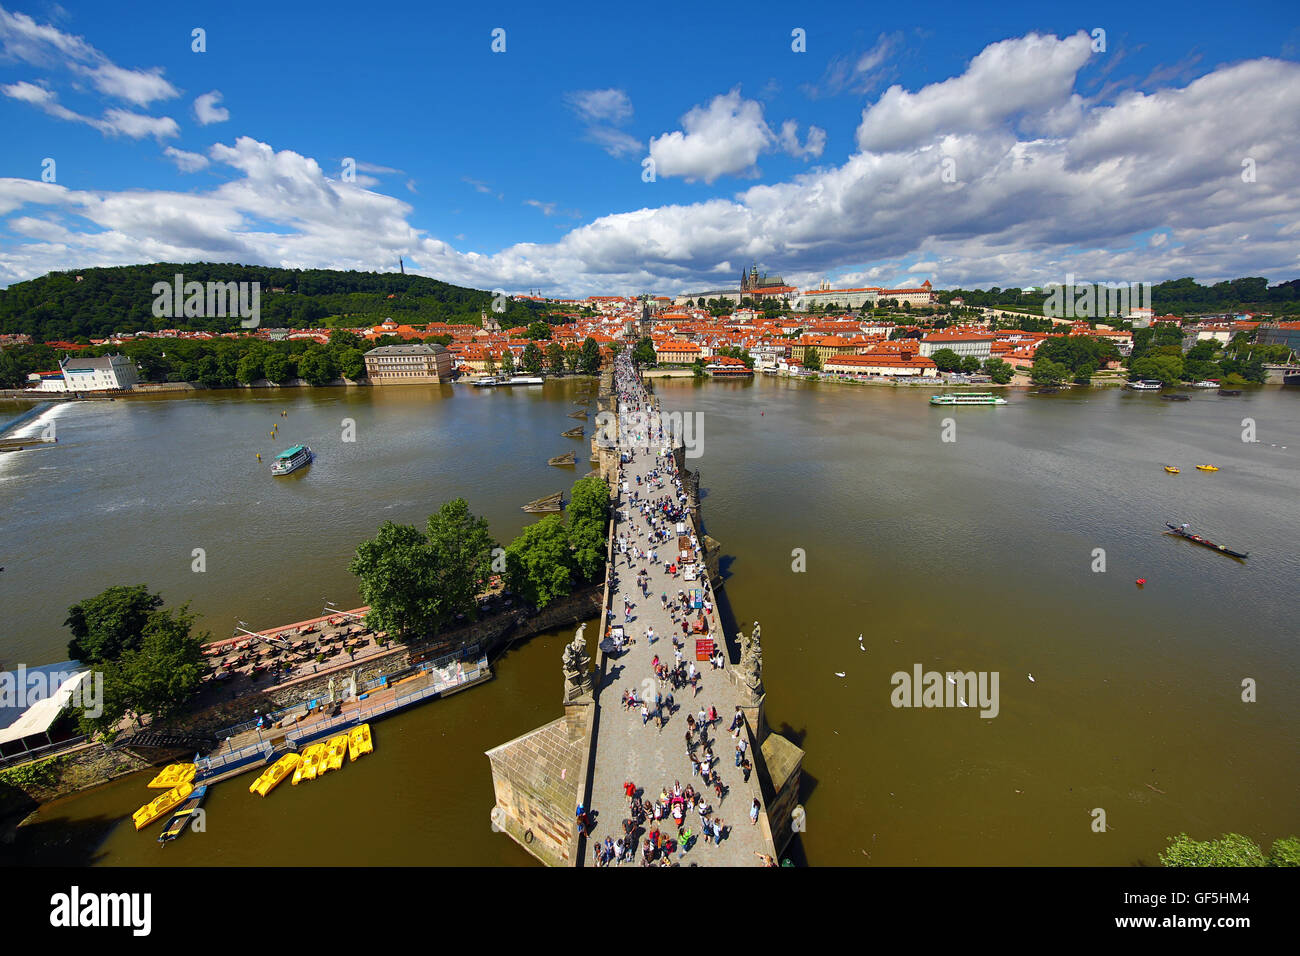 St. Vitus Cathedral and Prague Castle skyline with the Charles Bridge over the Vltava River in Prague, Czech Republic Stock Photo